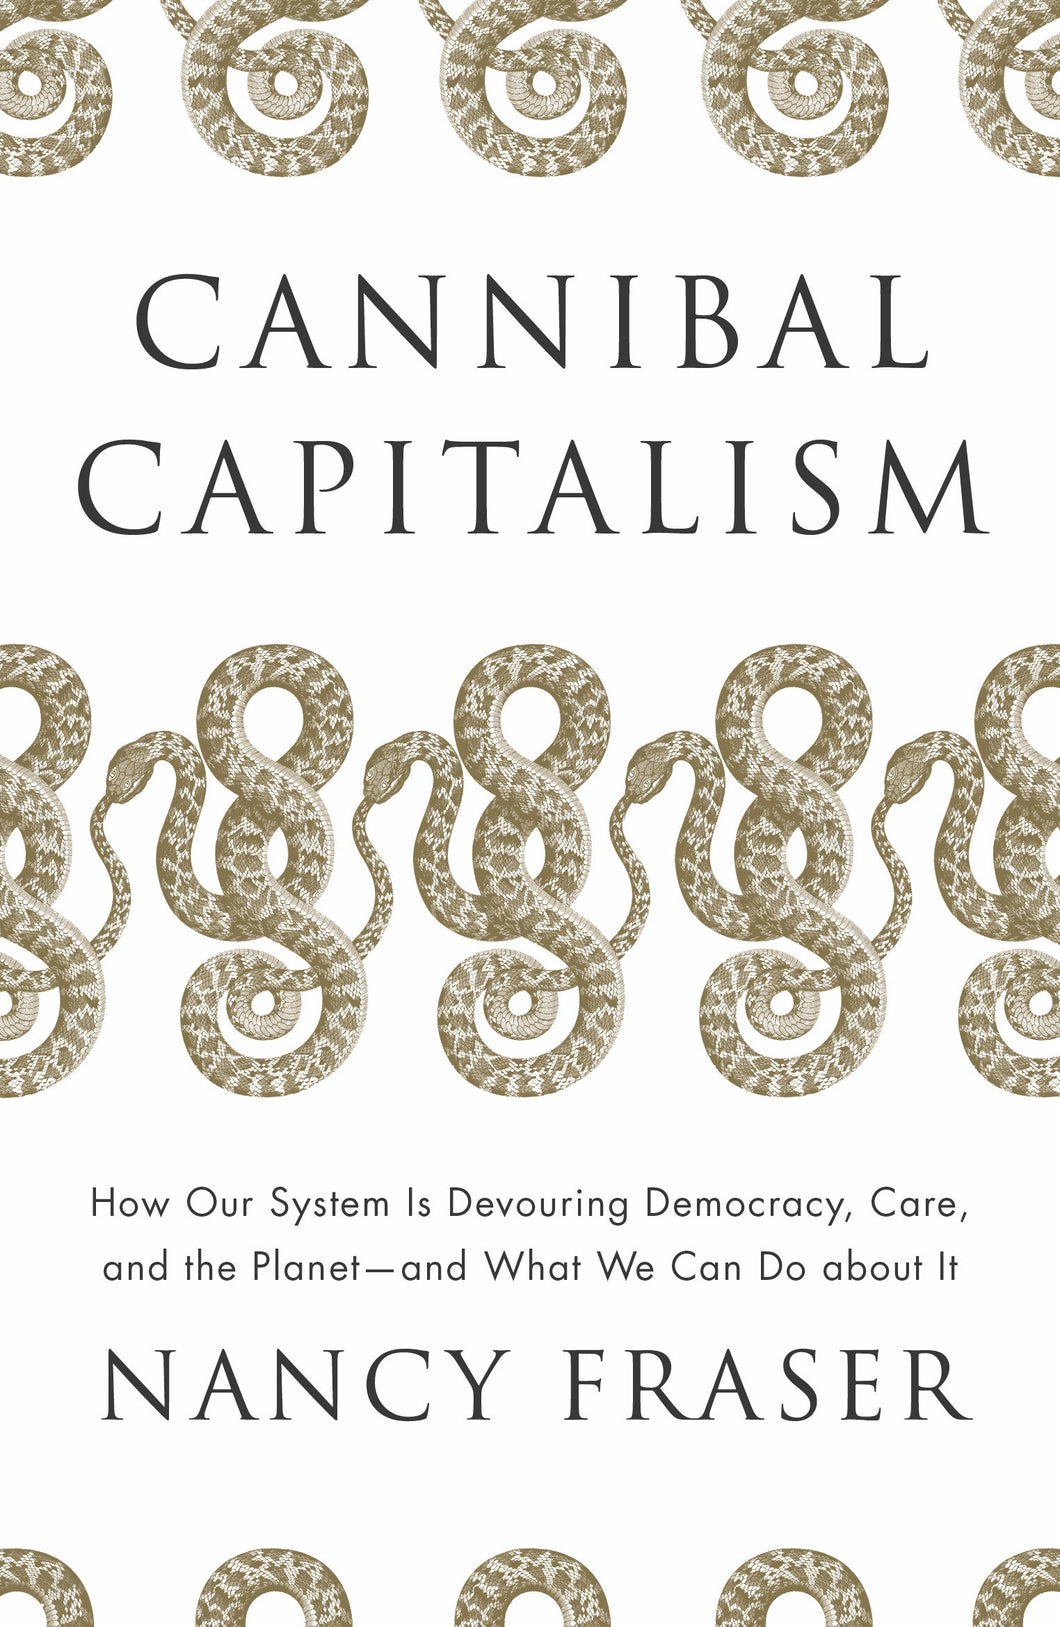 Cannibal Capitalism: How our System is Devouring Democracy, Care, and the Planet and What We Can Do A bout It